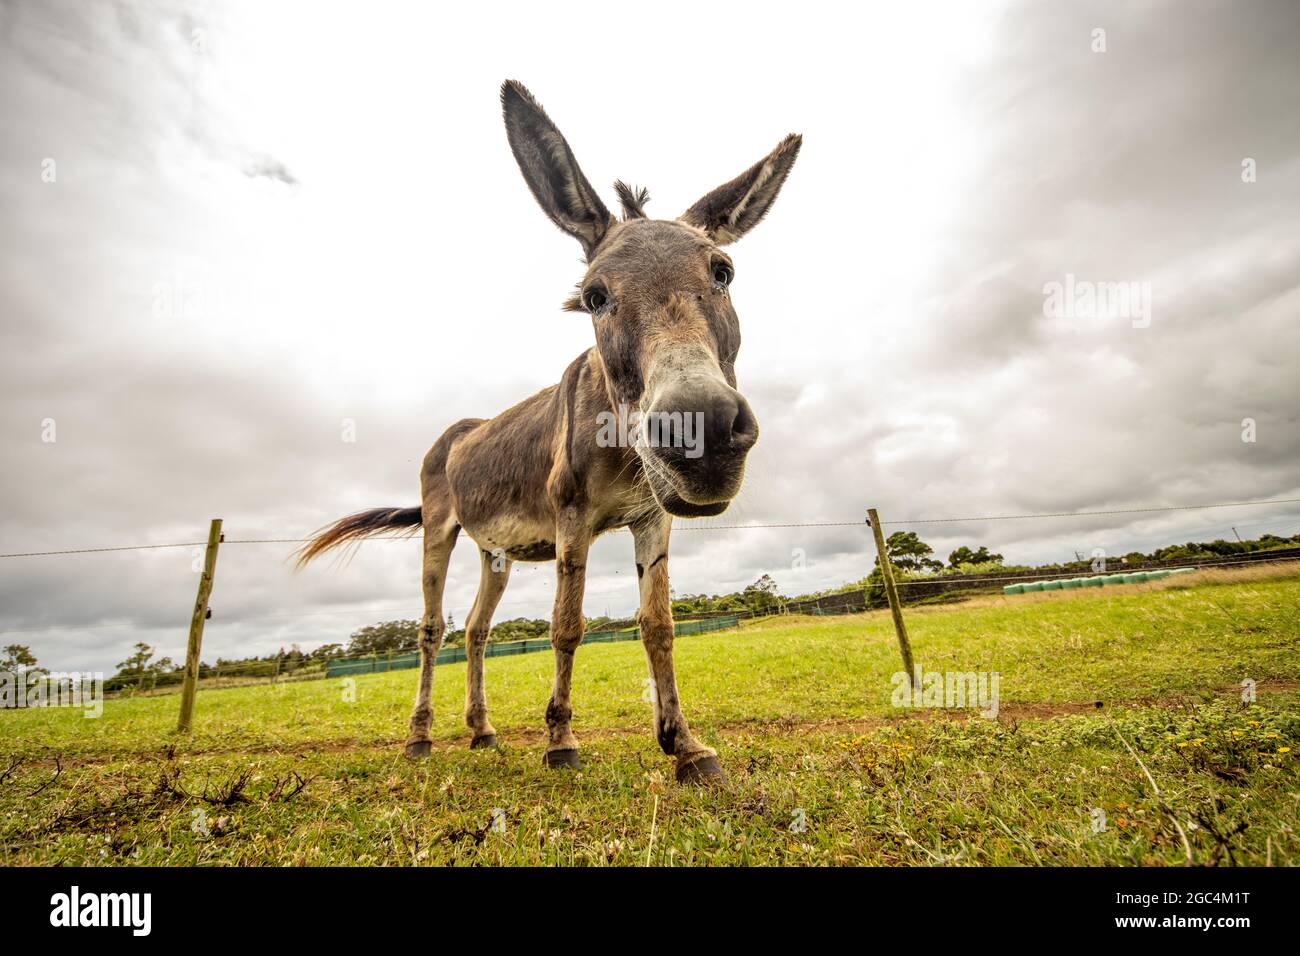 Brown donkey standing on green grass, big ears, cute and funny Stock Photo  - Alamy